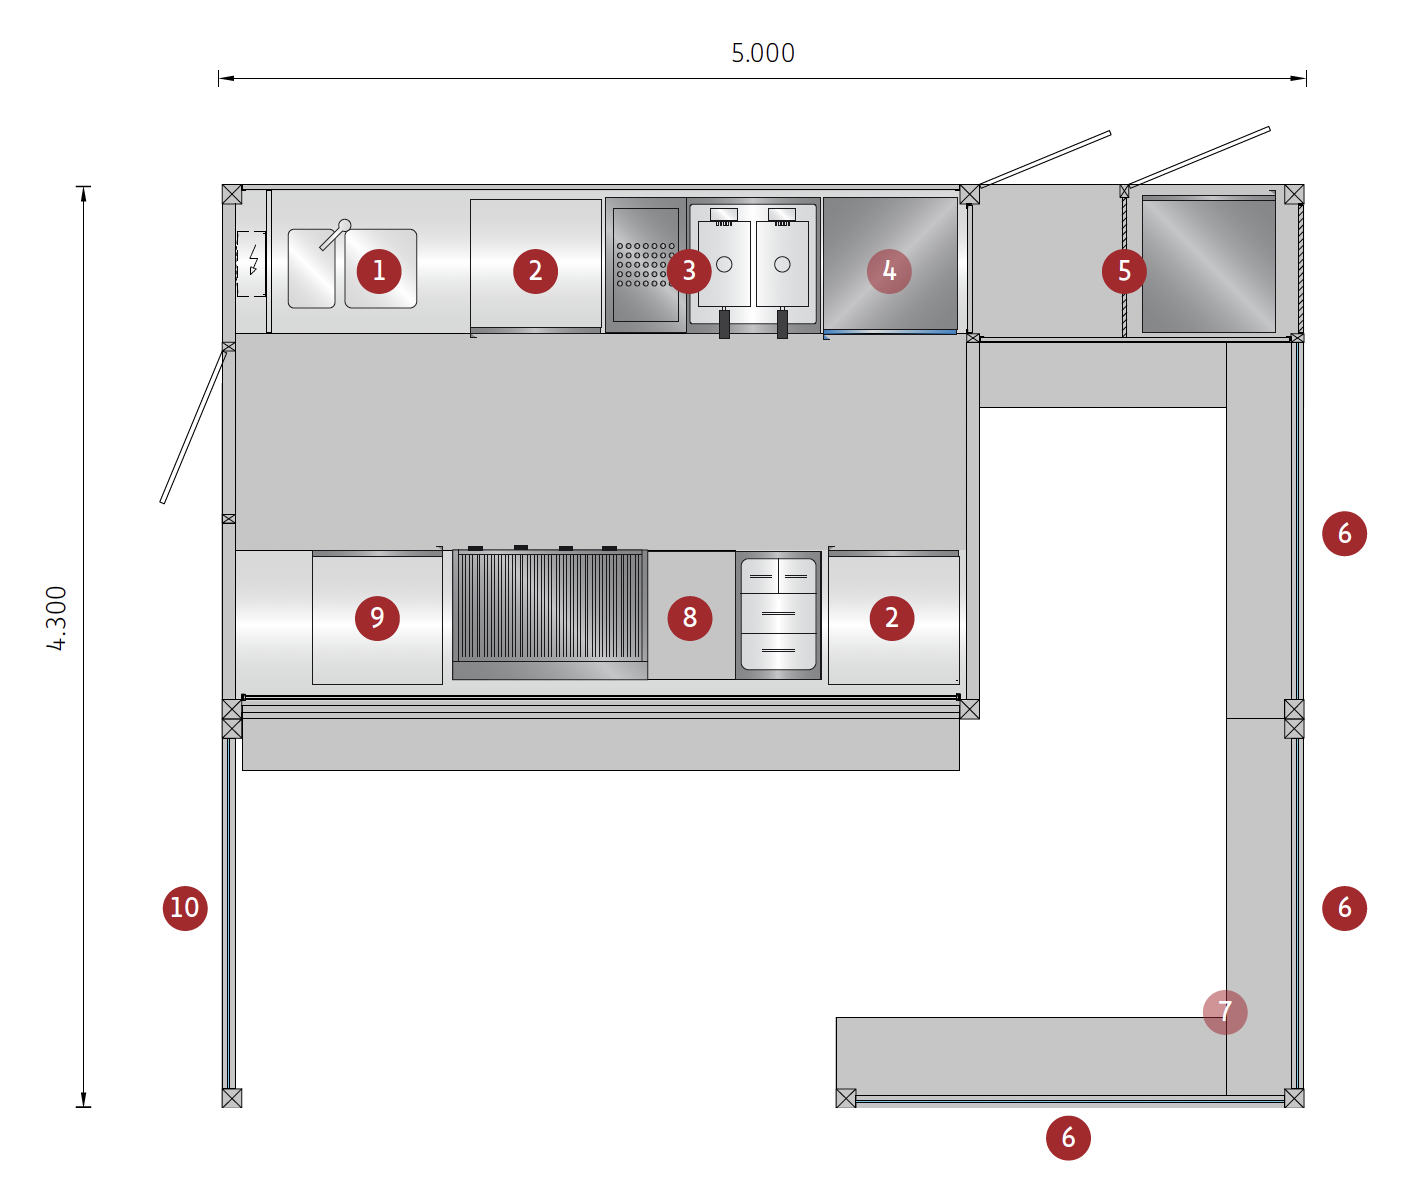 Floor plan example for the 4Season snack container